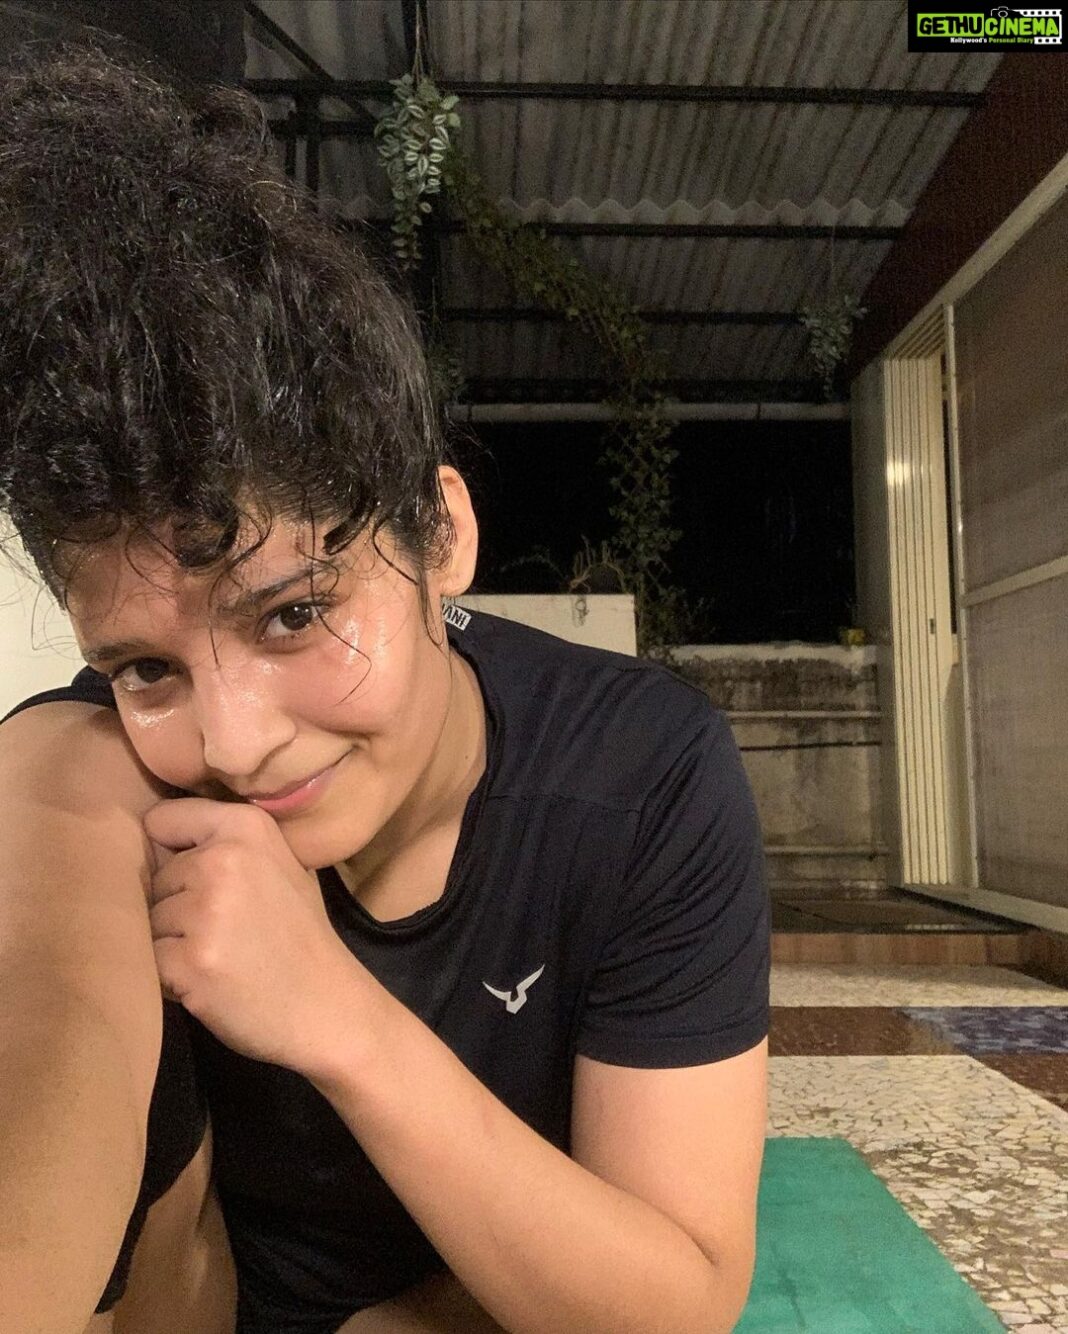 Ritika Singh Instagram - Nothing beats the post workout glow ✨ #postworkoutselfie #fitwithrit #getyourglowon